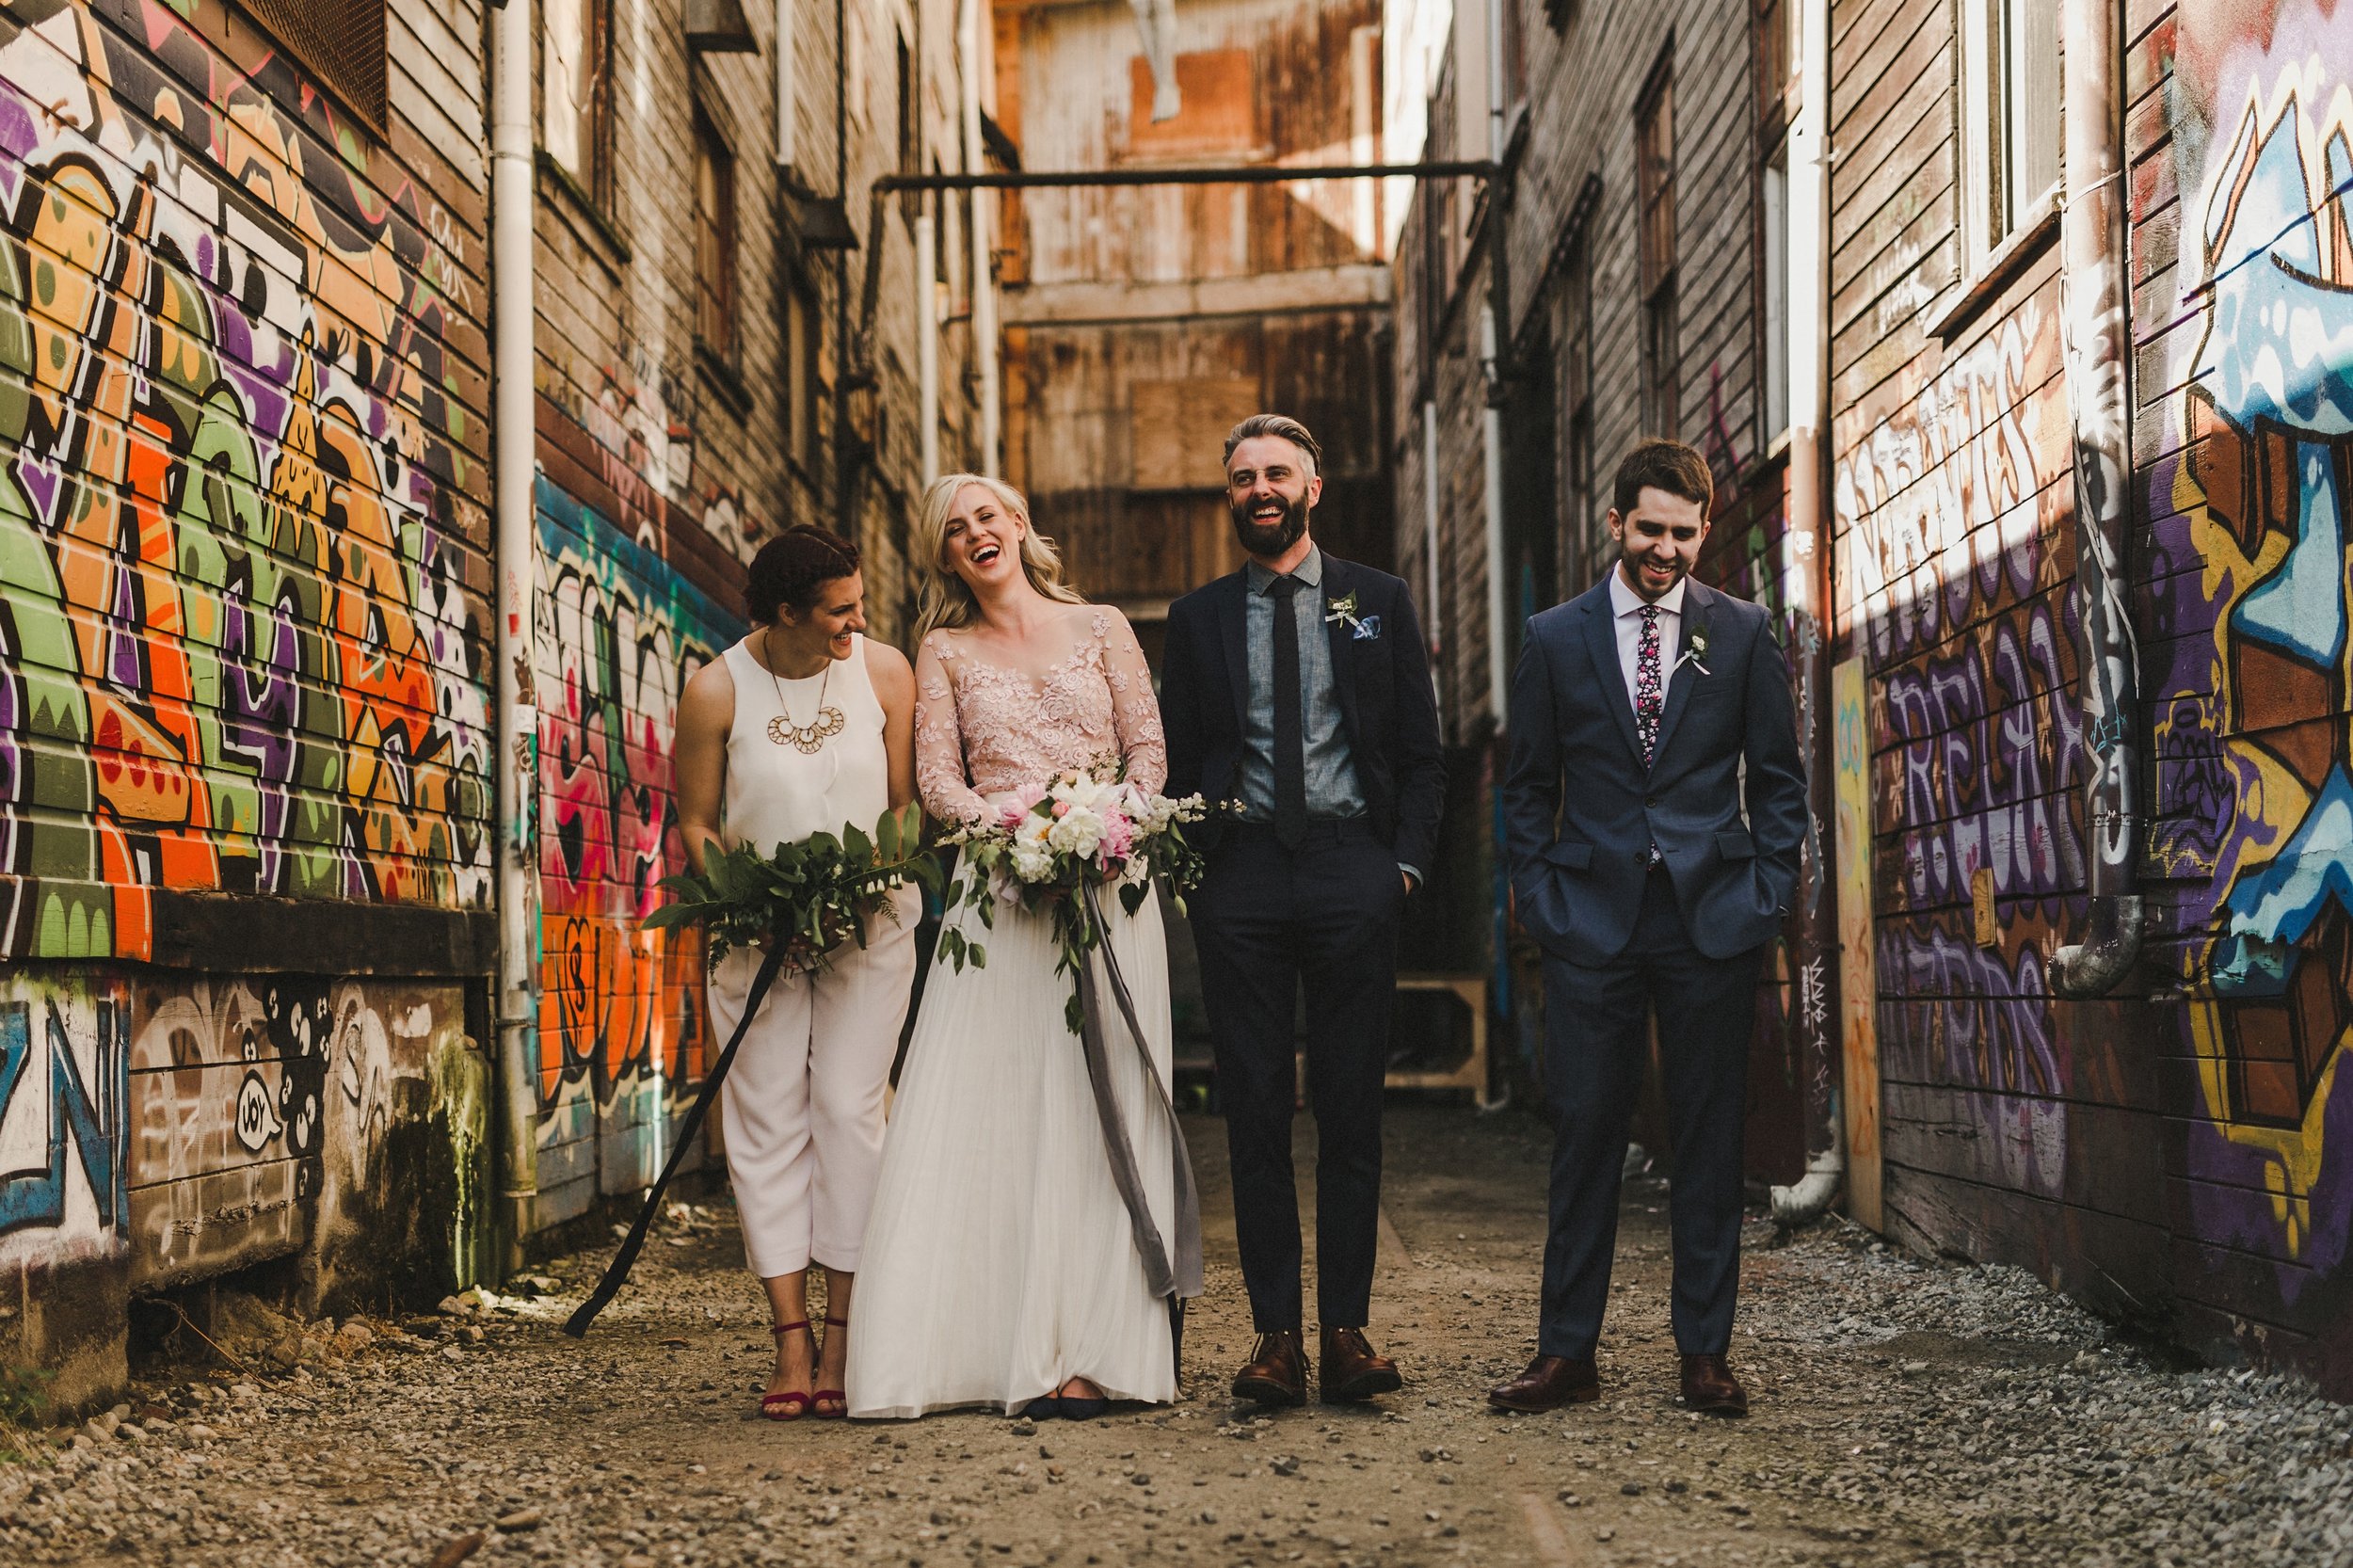 HOWE ABOUT FOREVA - Vancouver urban woodshop wedding by Shari + Mike photographers - wedding party